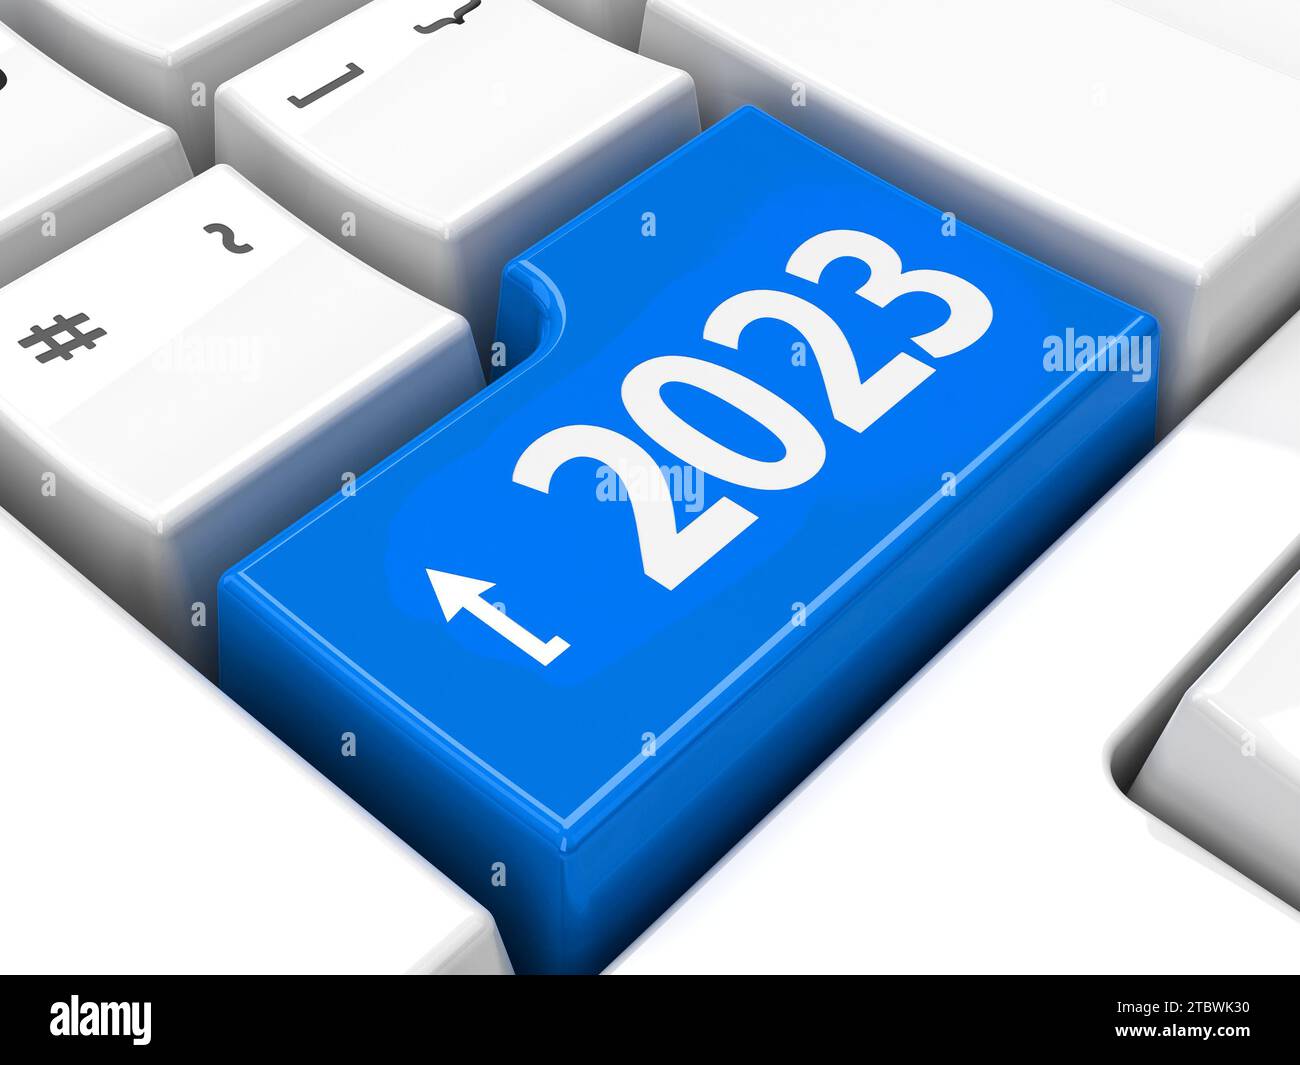 Computer keyboard with 2023 enter key, three-dimensional rendering, 3D illustration Stock Photo